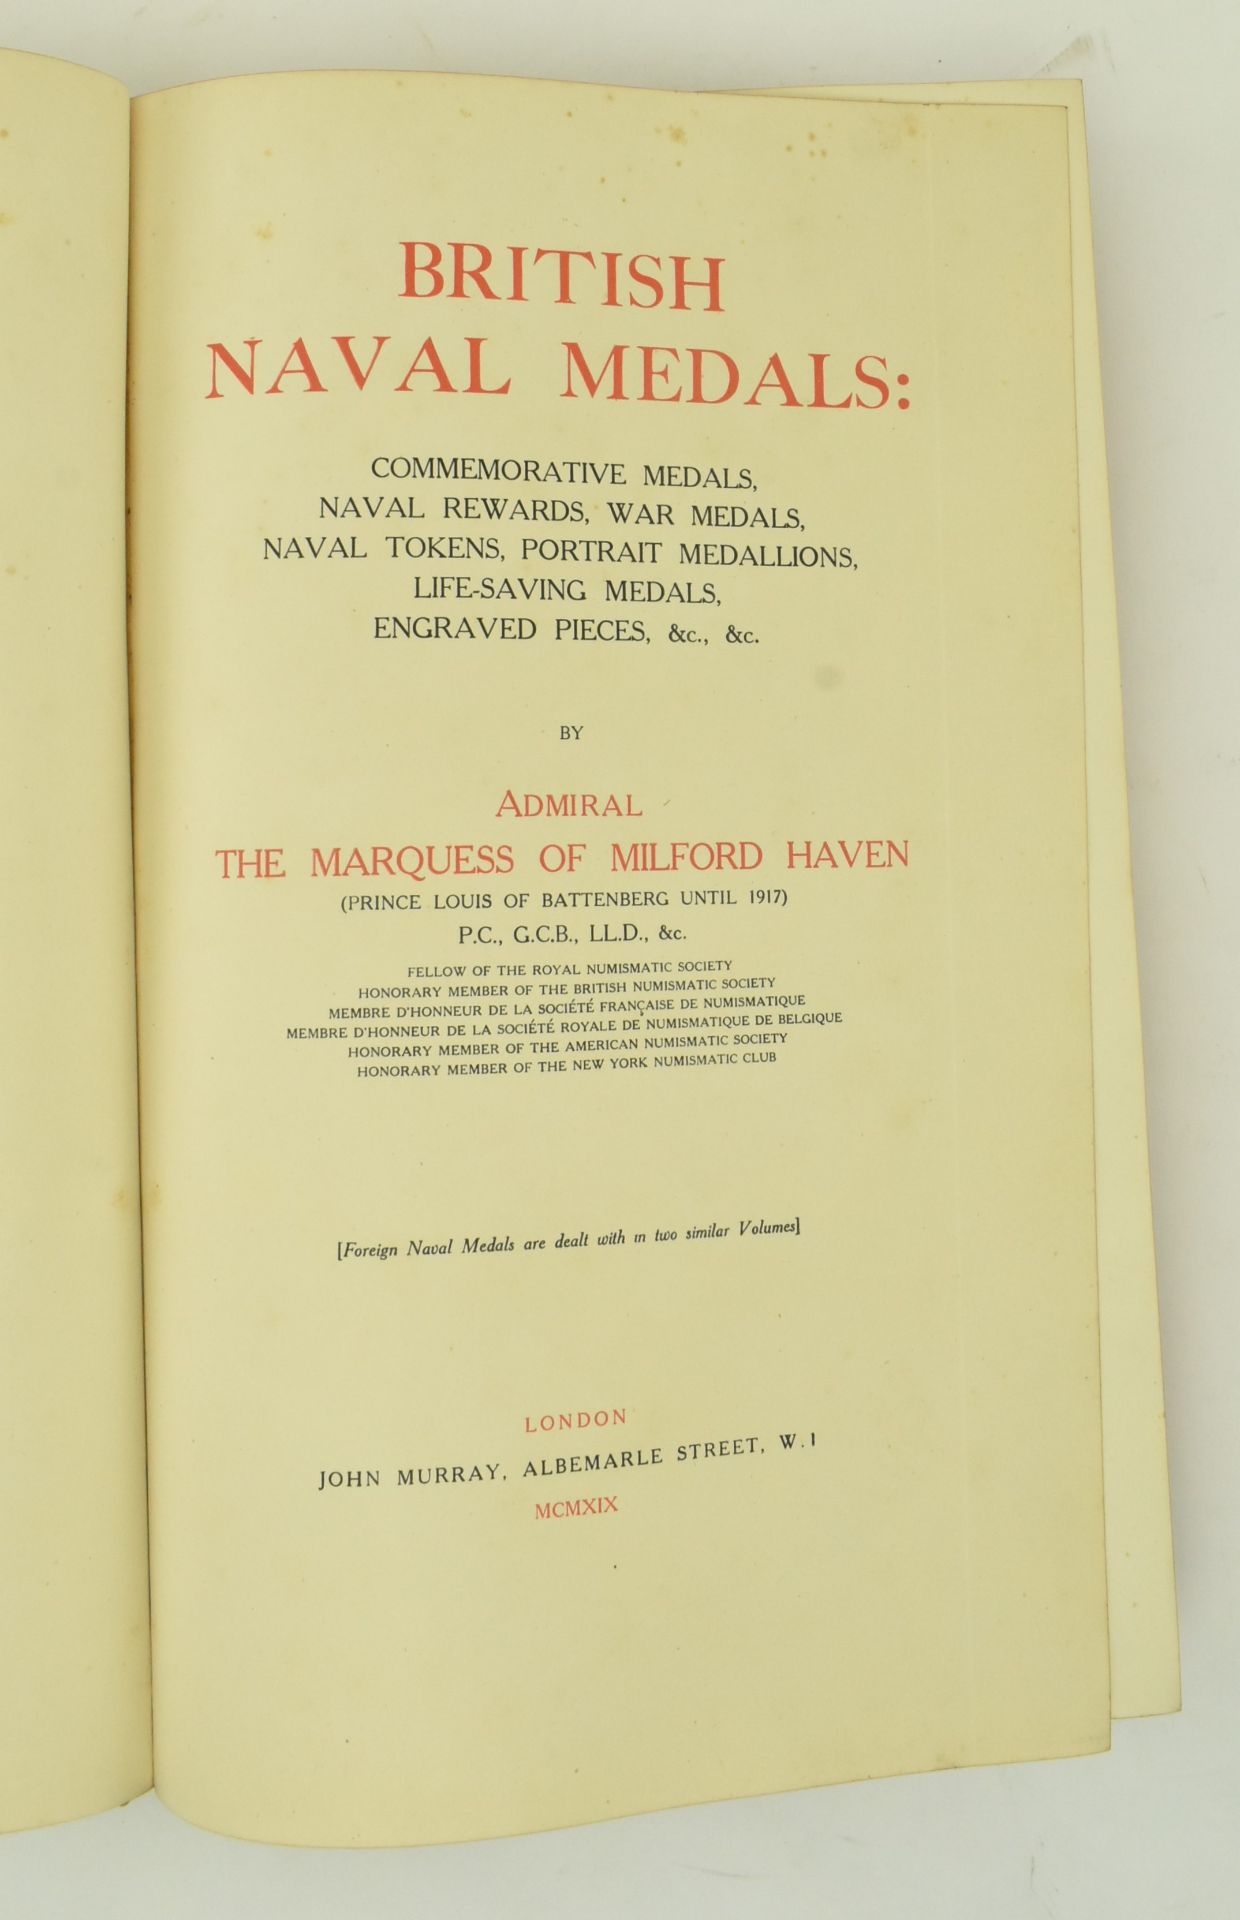 1919 BRITISH NAVAL MEDALS BY THE MARQUESS OF MILFORD HAVEN - Bild 2 aus 7